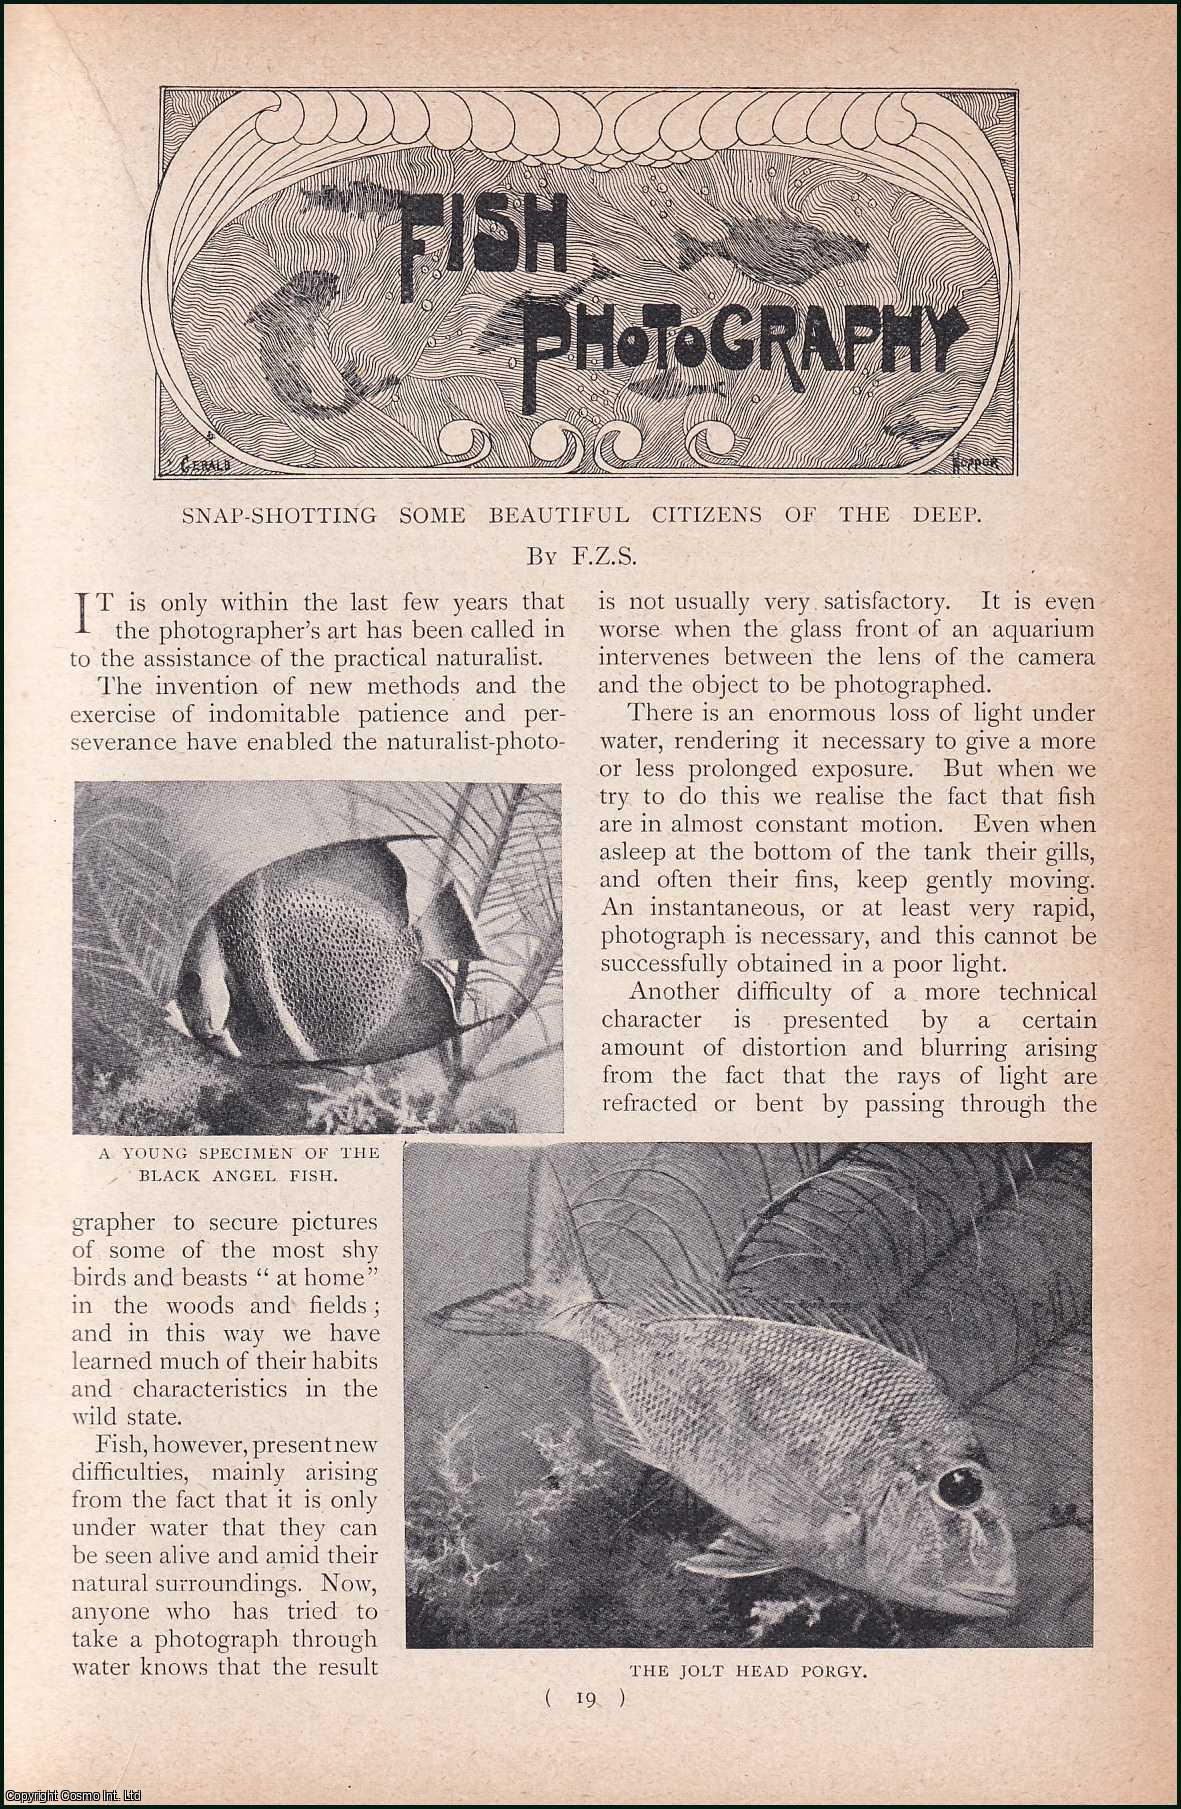 F.Z.S. - Fish Photography : Snap-Shotting some Beautiful Citizens of the Deep. An uncommon original article from the Harmsworth London Magazine, 1902.